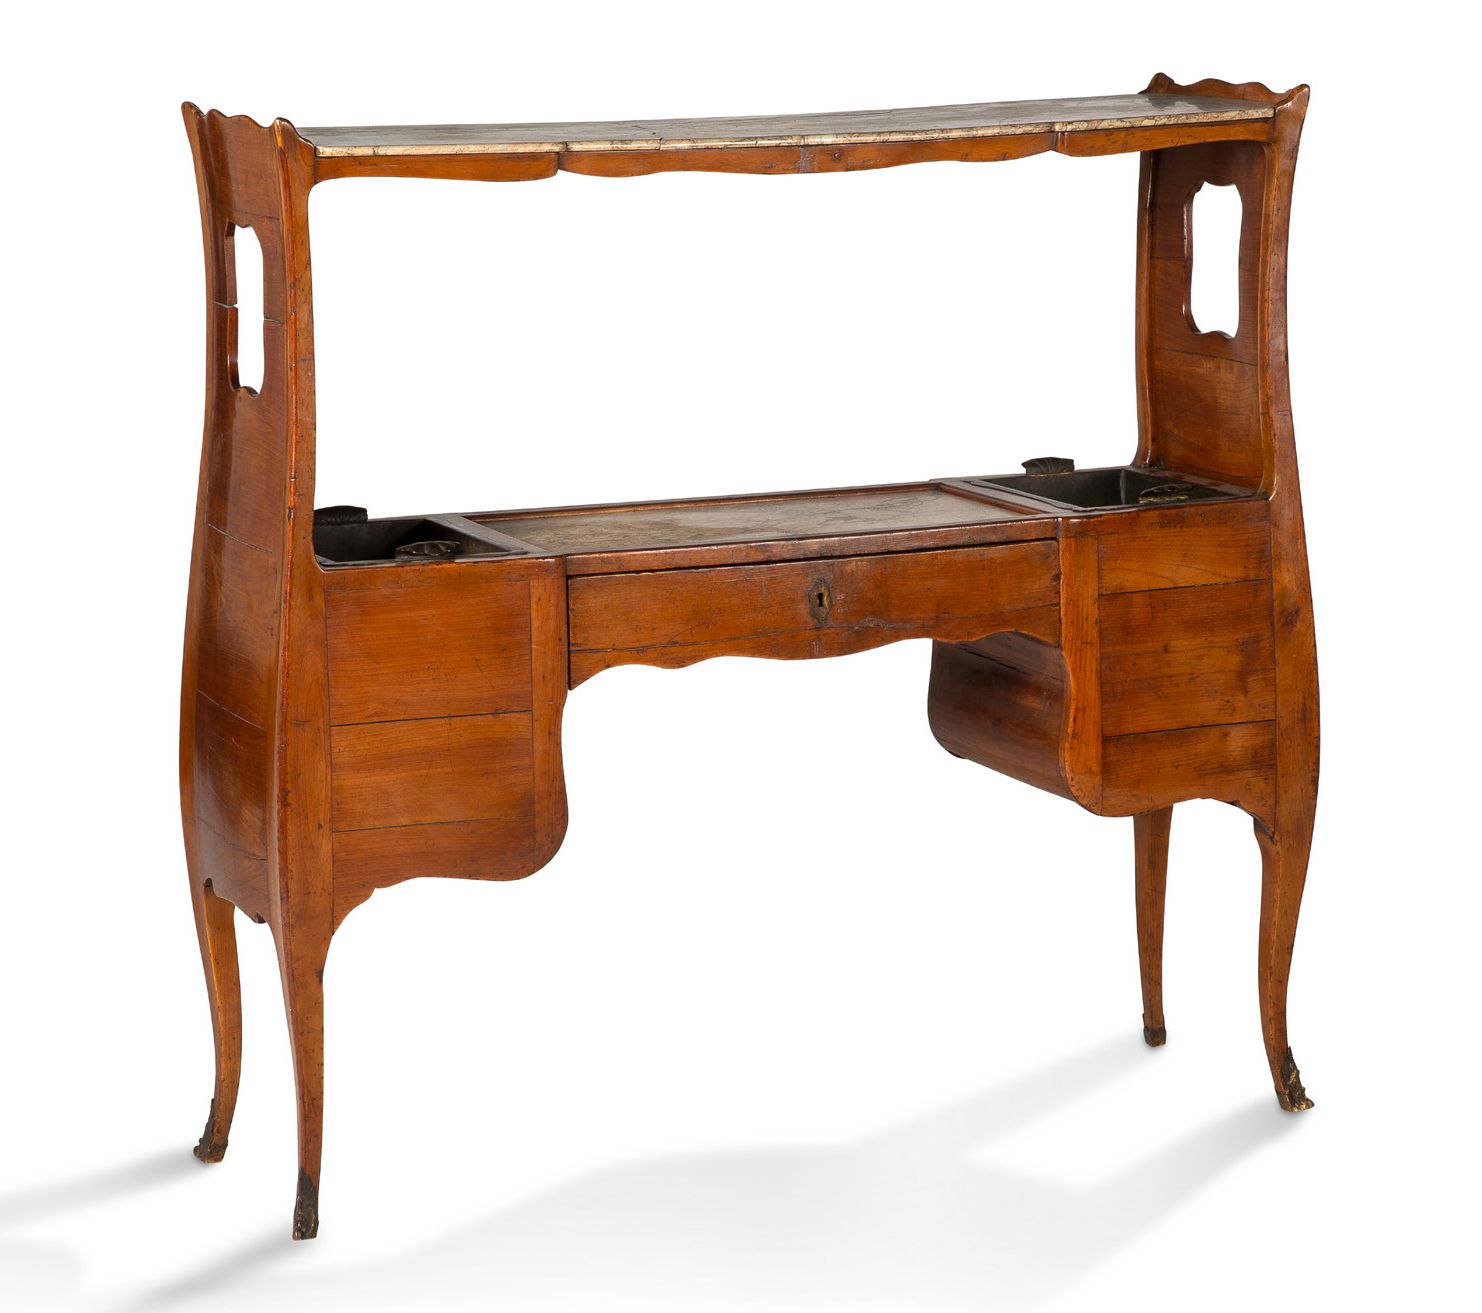 ATTRIBUÉ À JEAN-FRANÇOIS HACHE(1730-1796) Rare sideboard forming a cooler or ice&hellip;